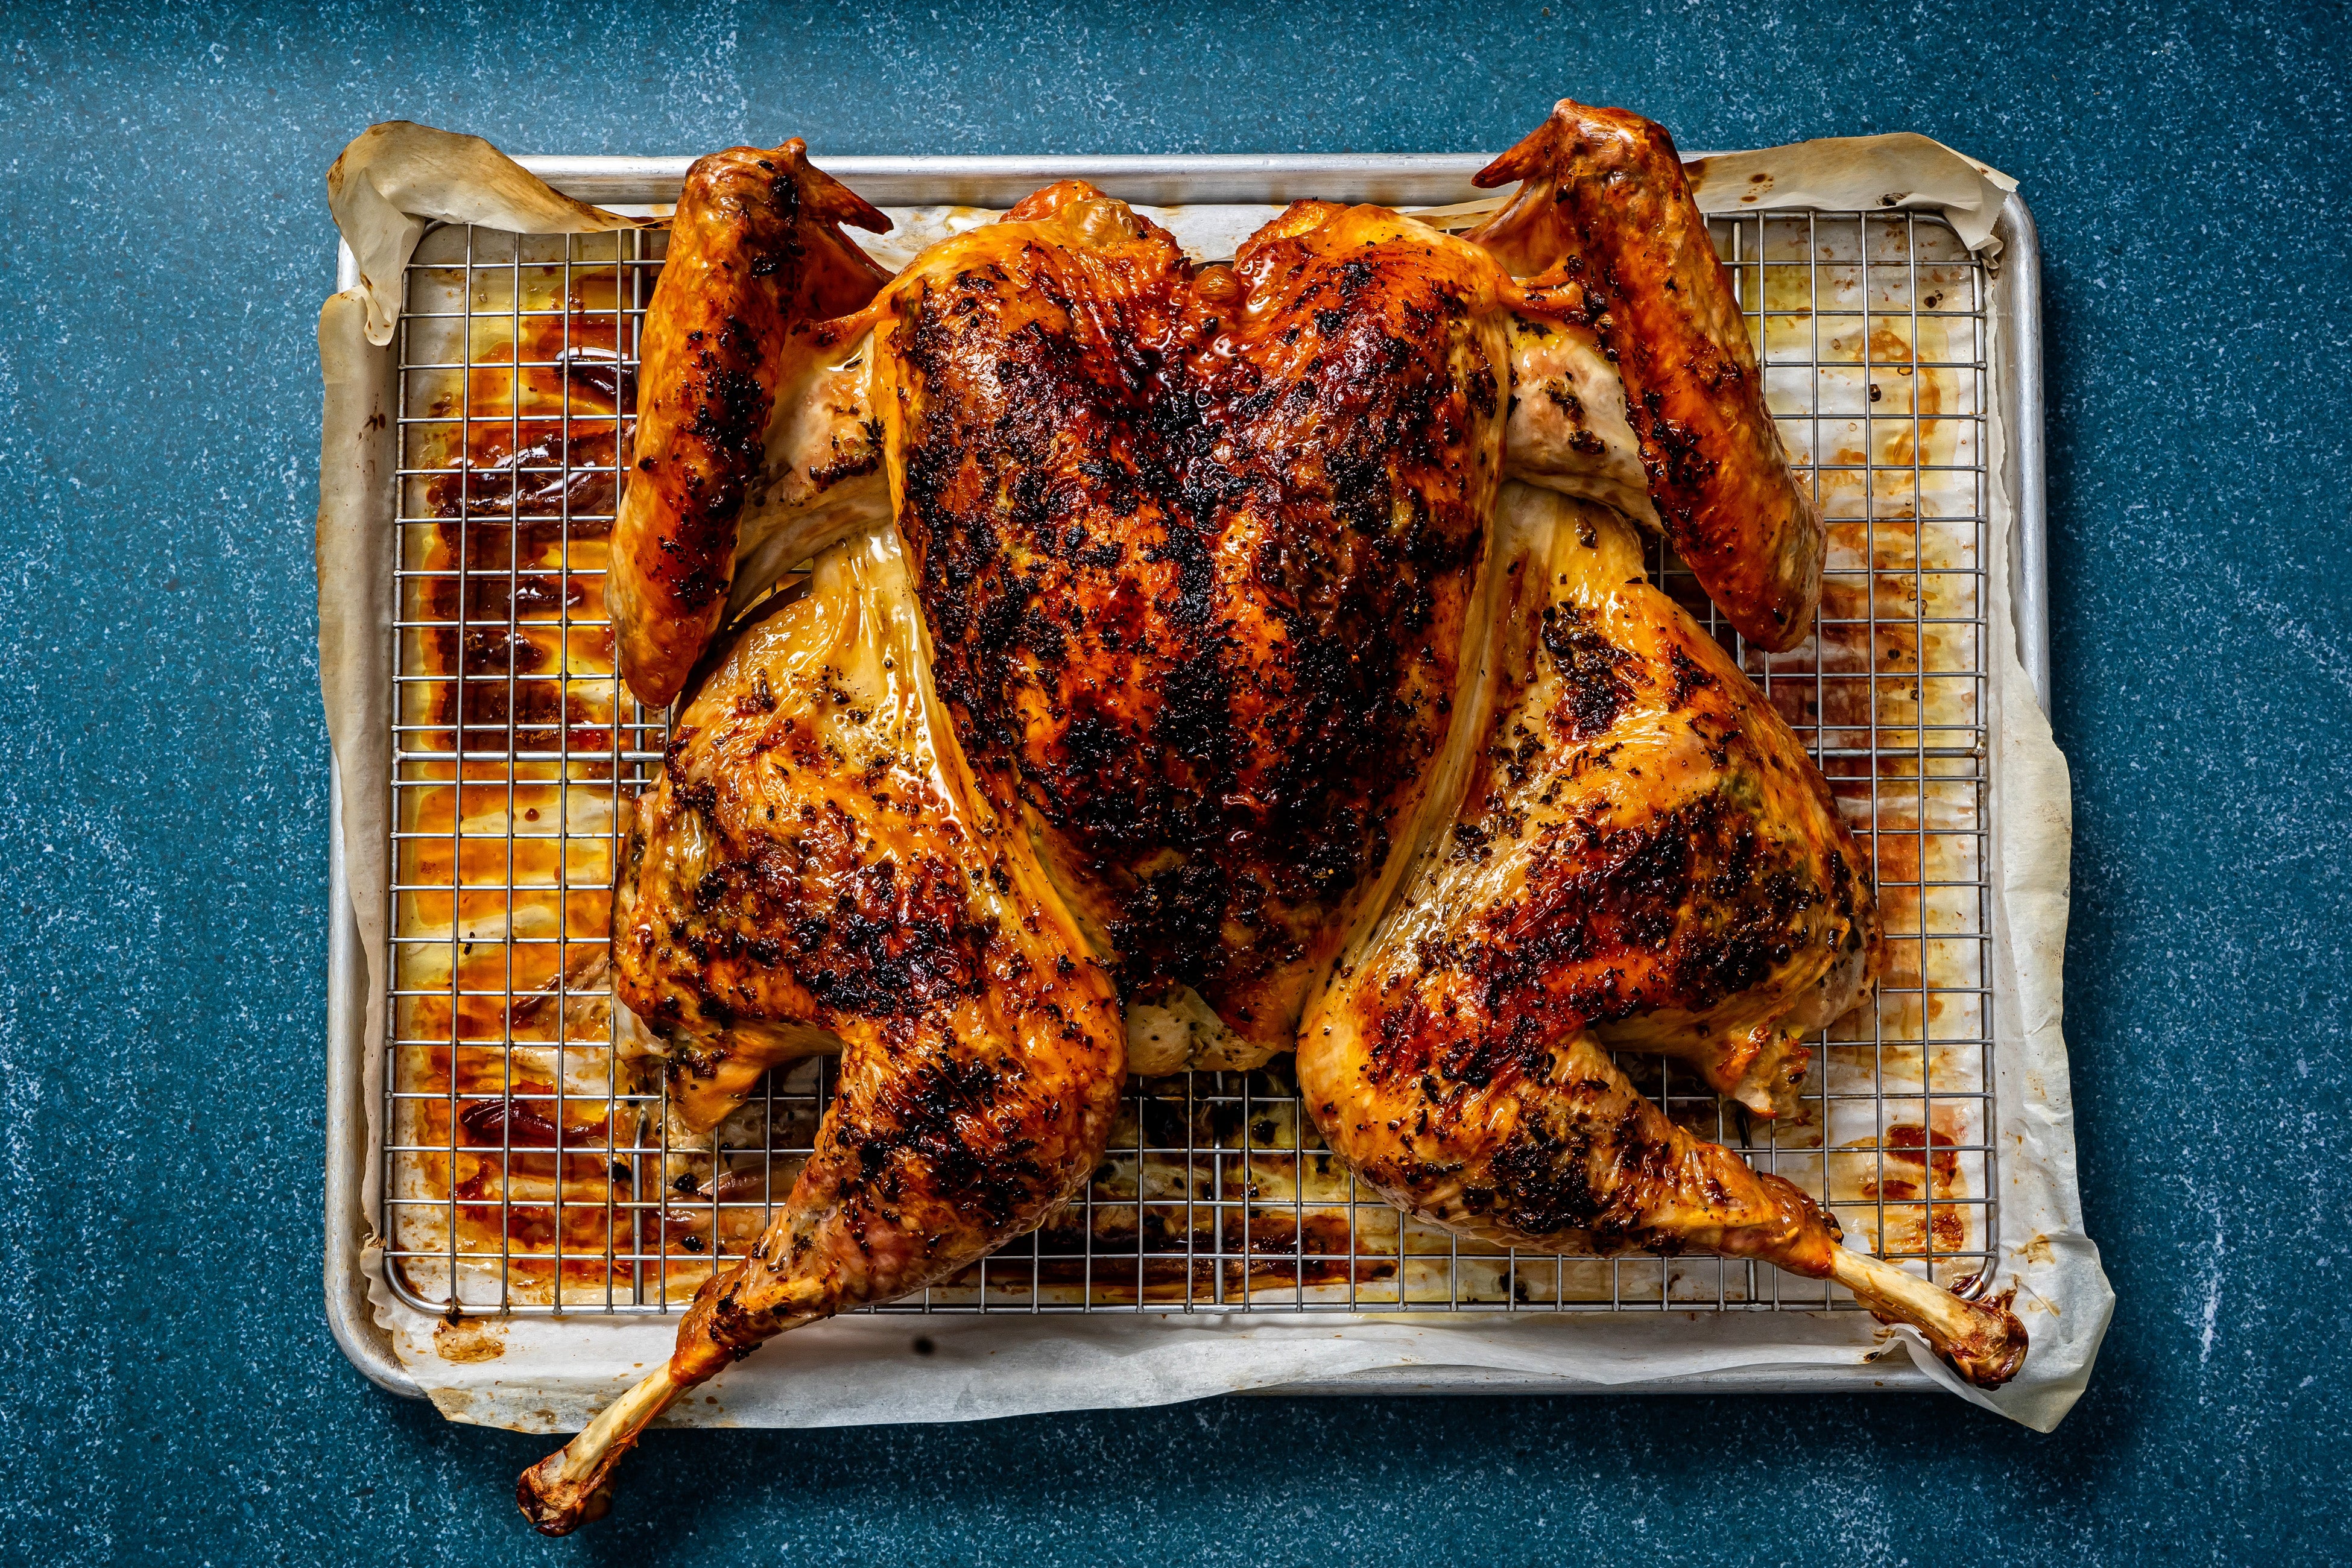 If you didn’t get a chance to brine a turkey last year, now’s your chance